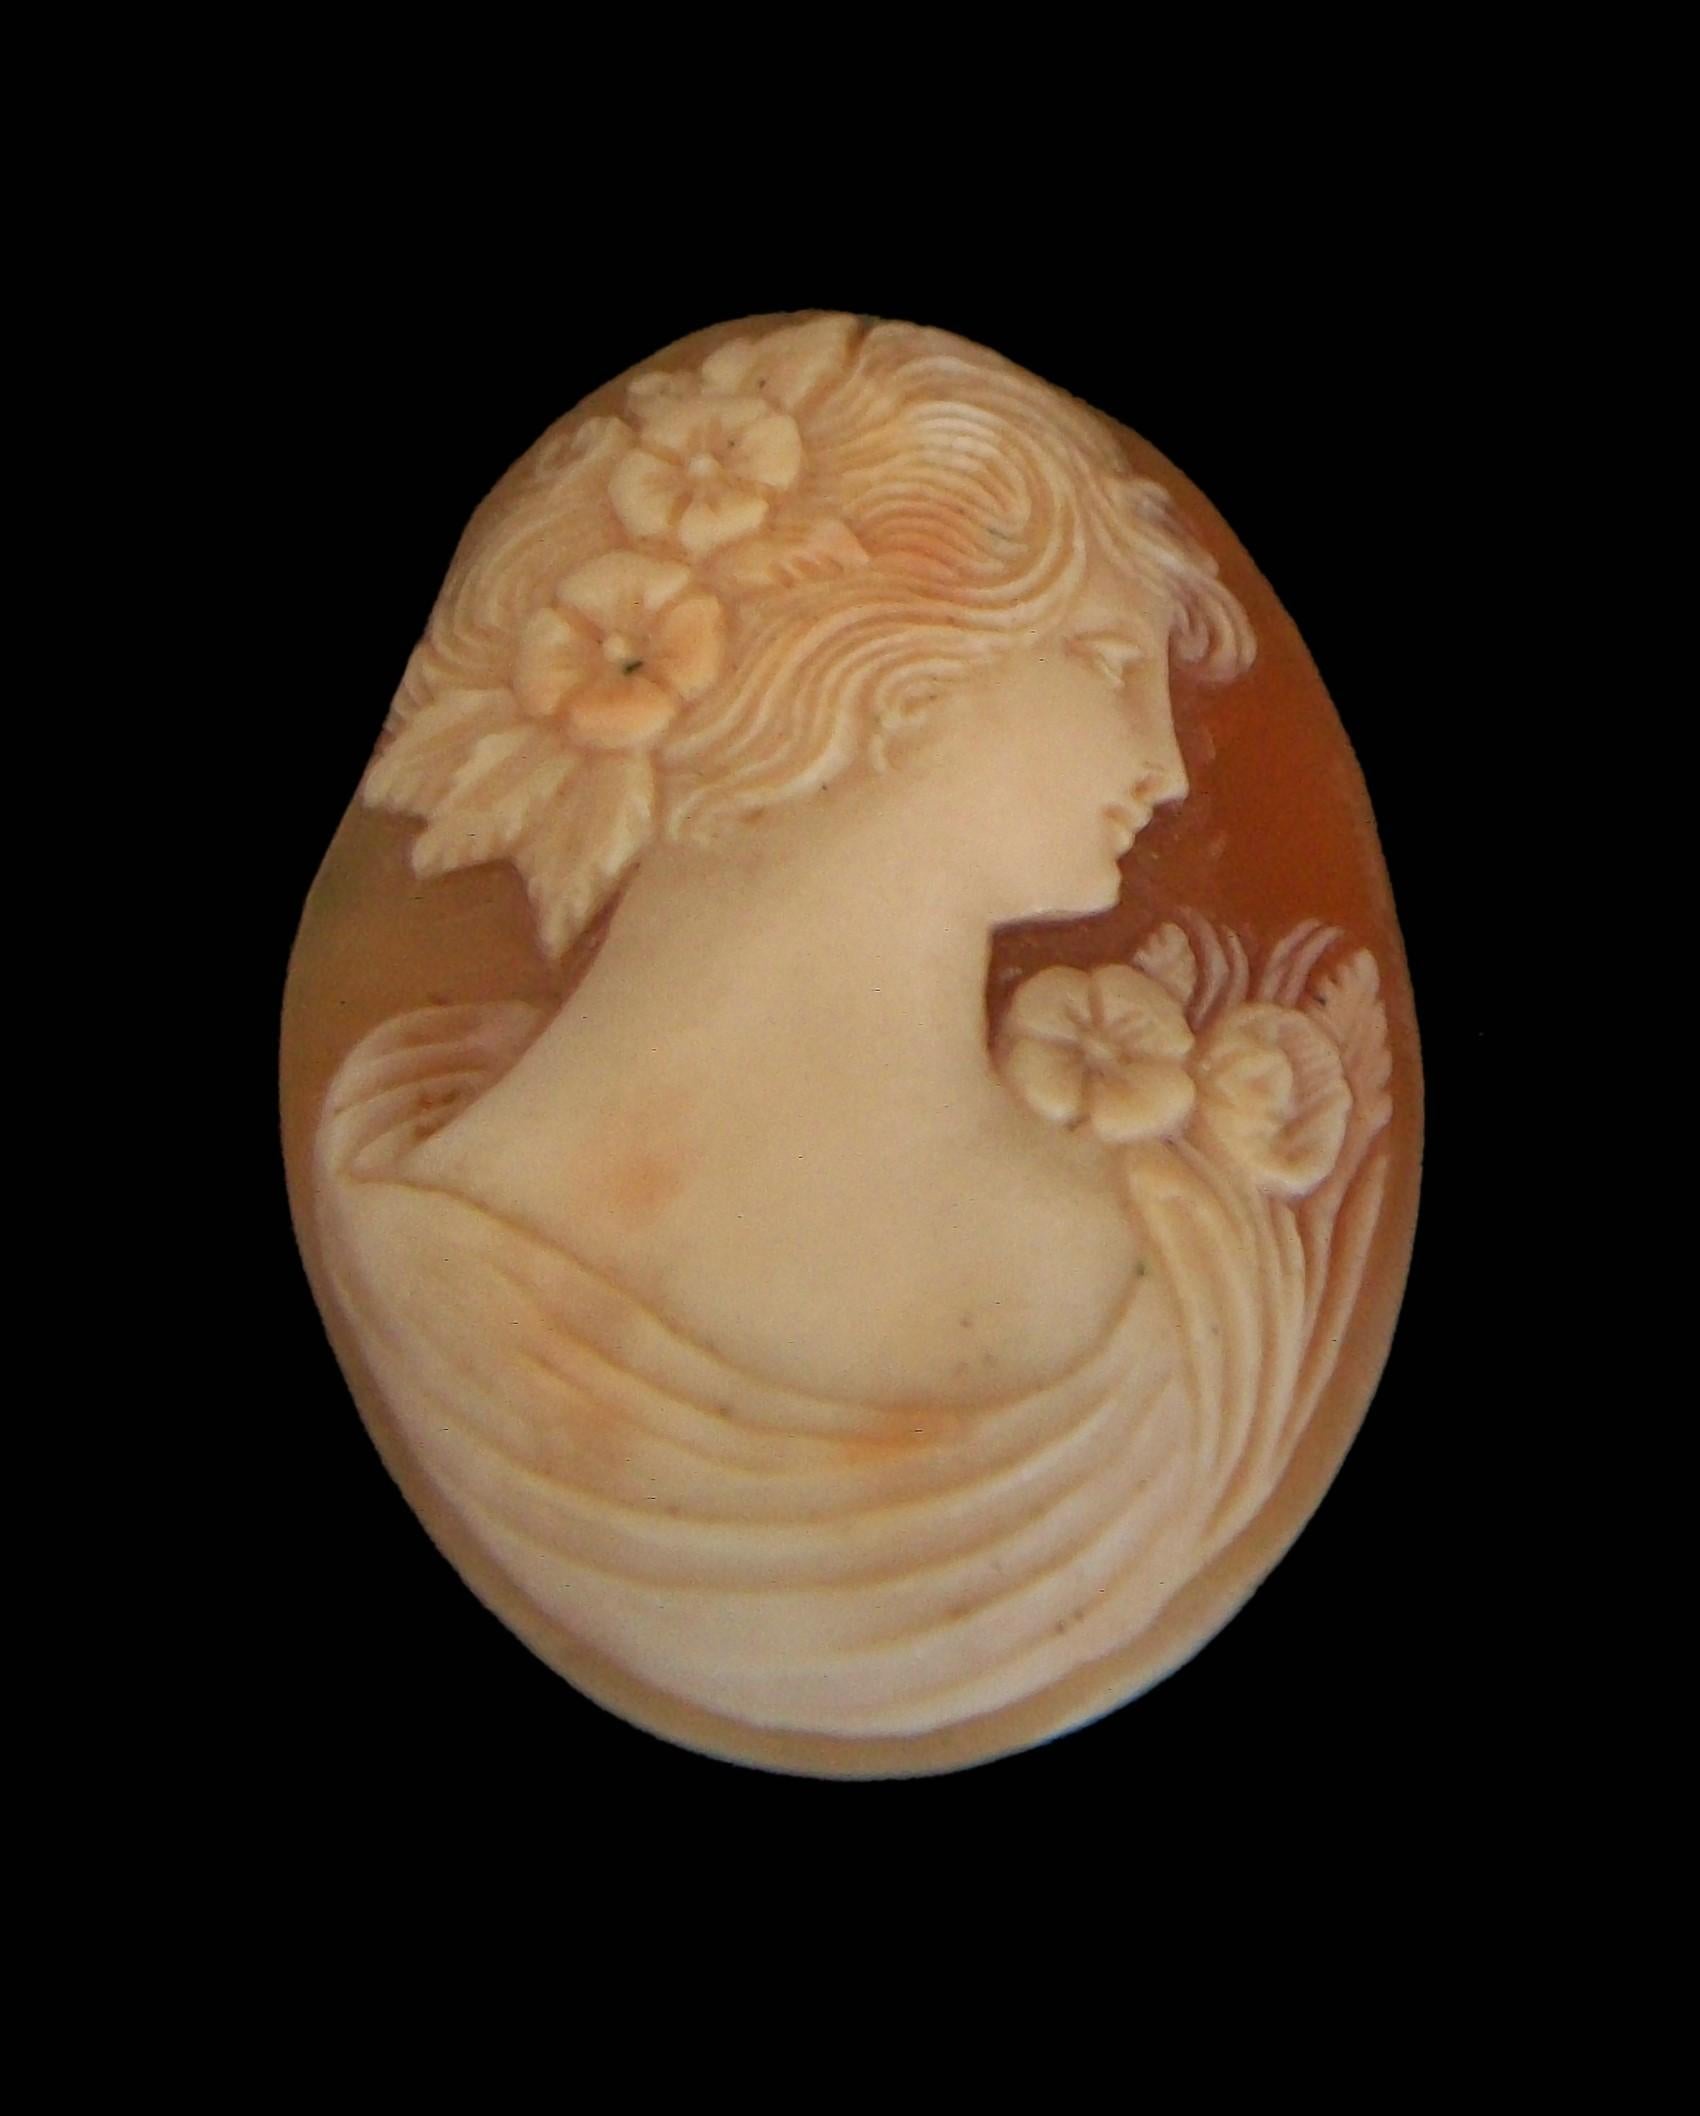 Antique Art Nouveau shell cameo - hand carved with fine detail - featuring a profile of a woman with flowers in her hair and on her shoulder with classical draped bodice - unmounted - Italy - circa 1900.

Excellent antique condition - irregular